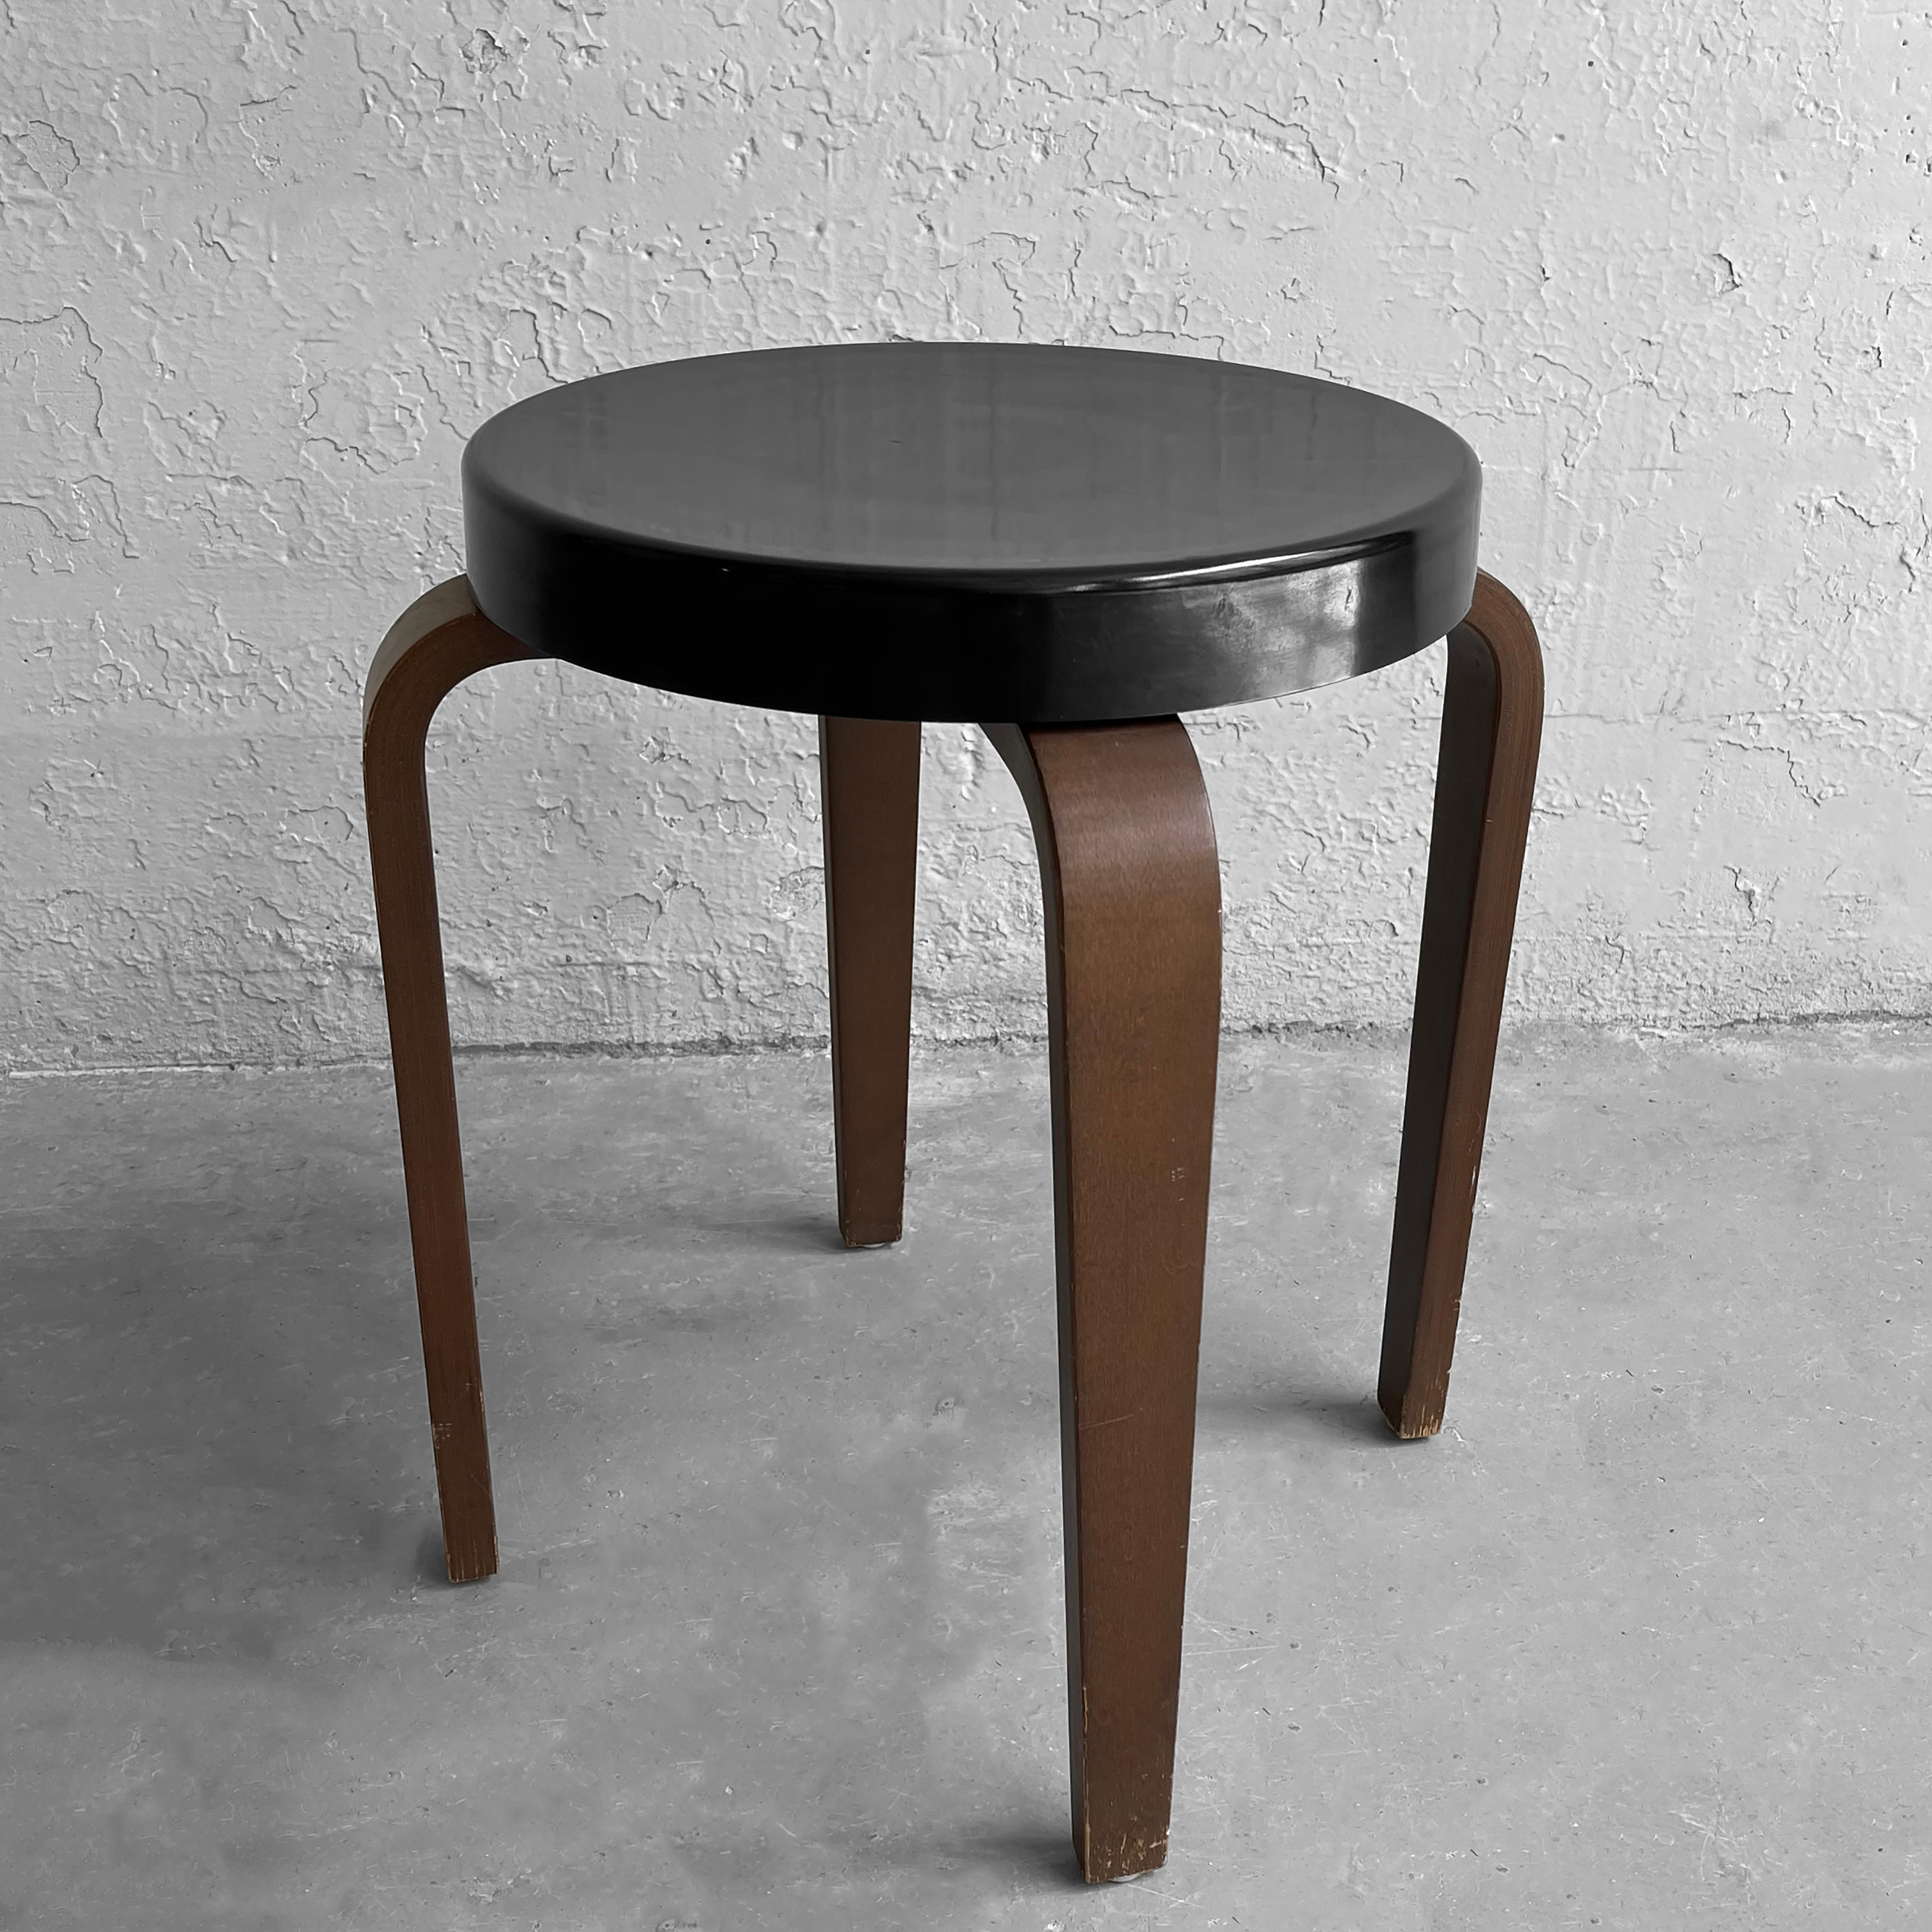 Classic, art deco, stackable stool by Thonet features bentwood legs with a black, 14 inch diameter, hard plastic, Bakelite top.